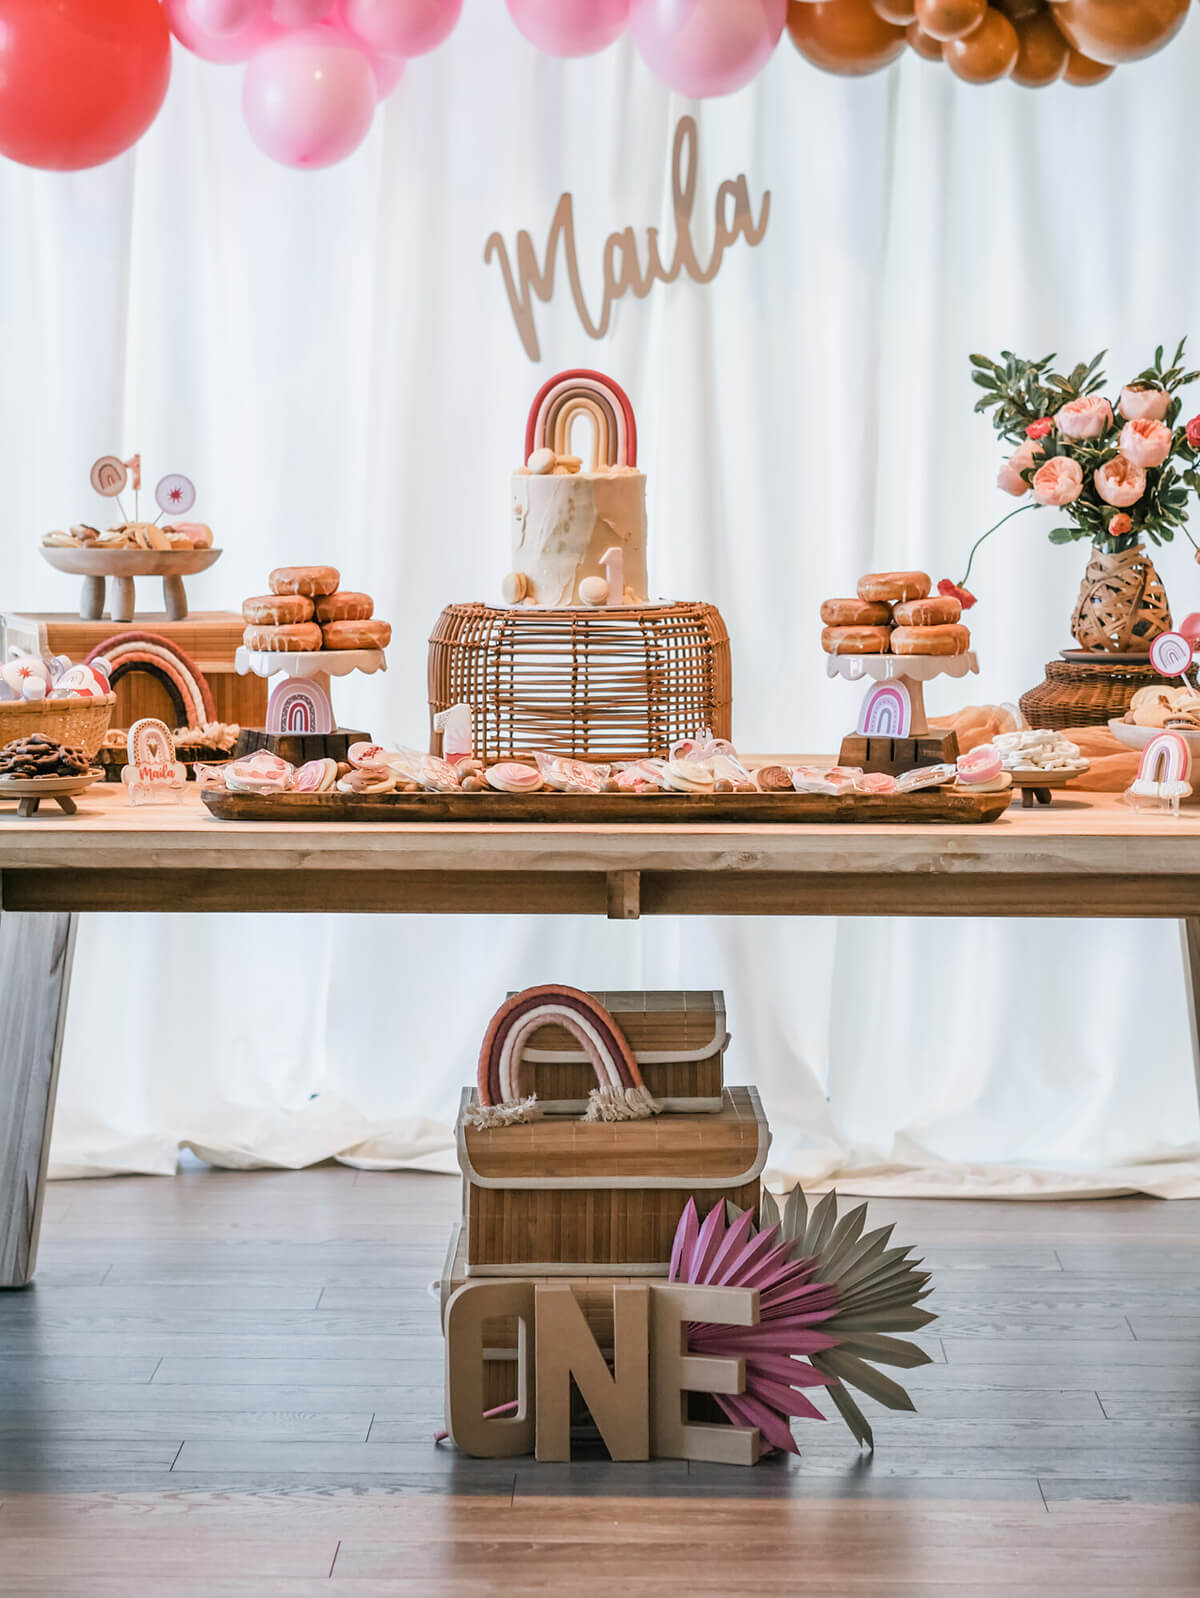 Styling a Decadent Dessert Table